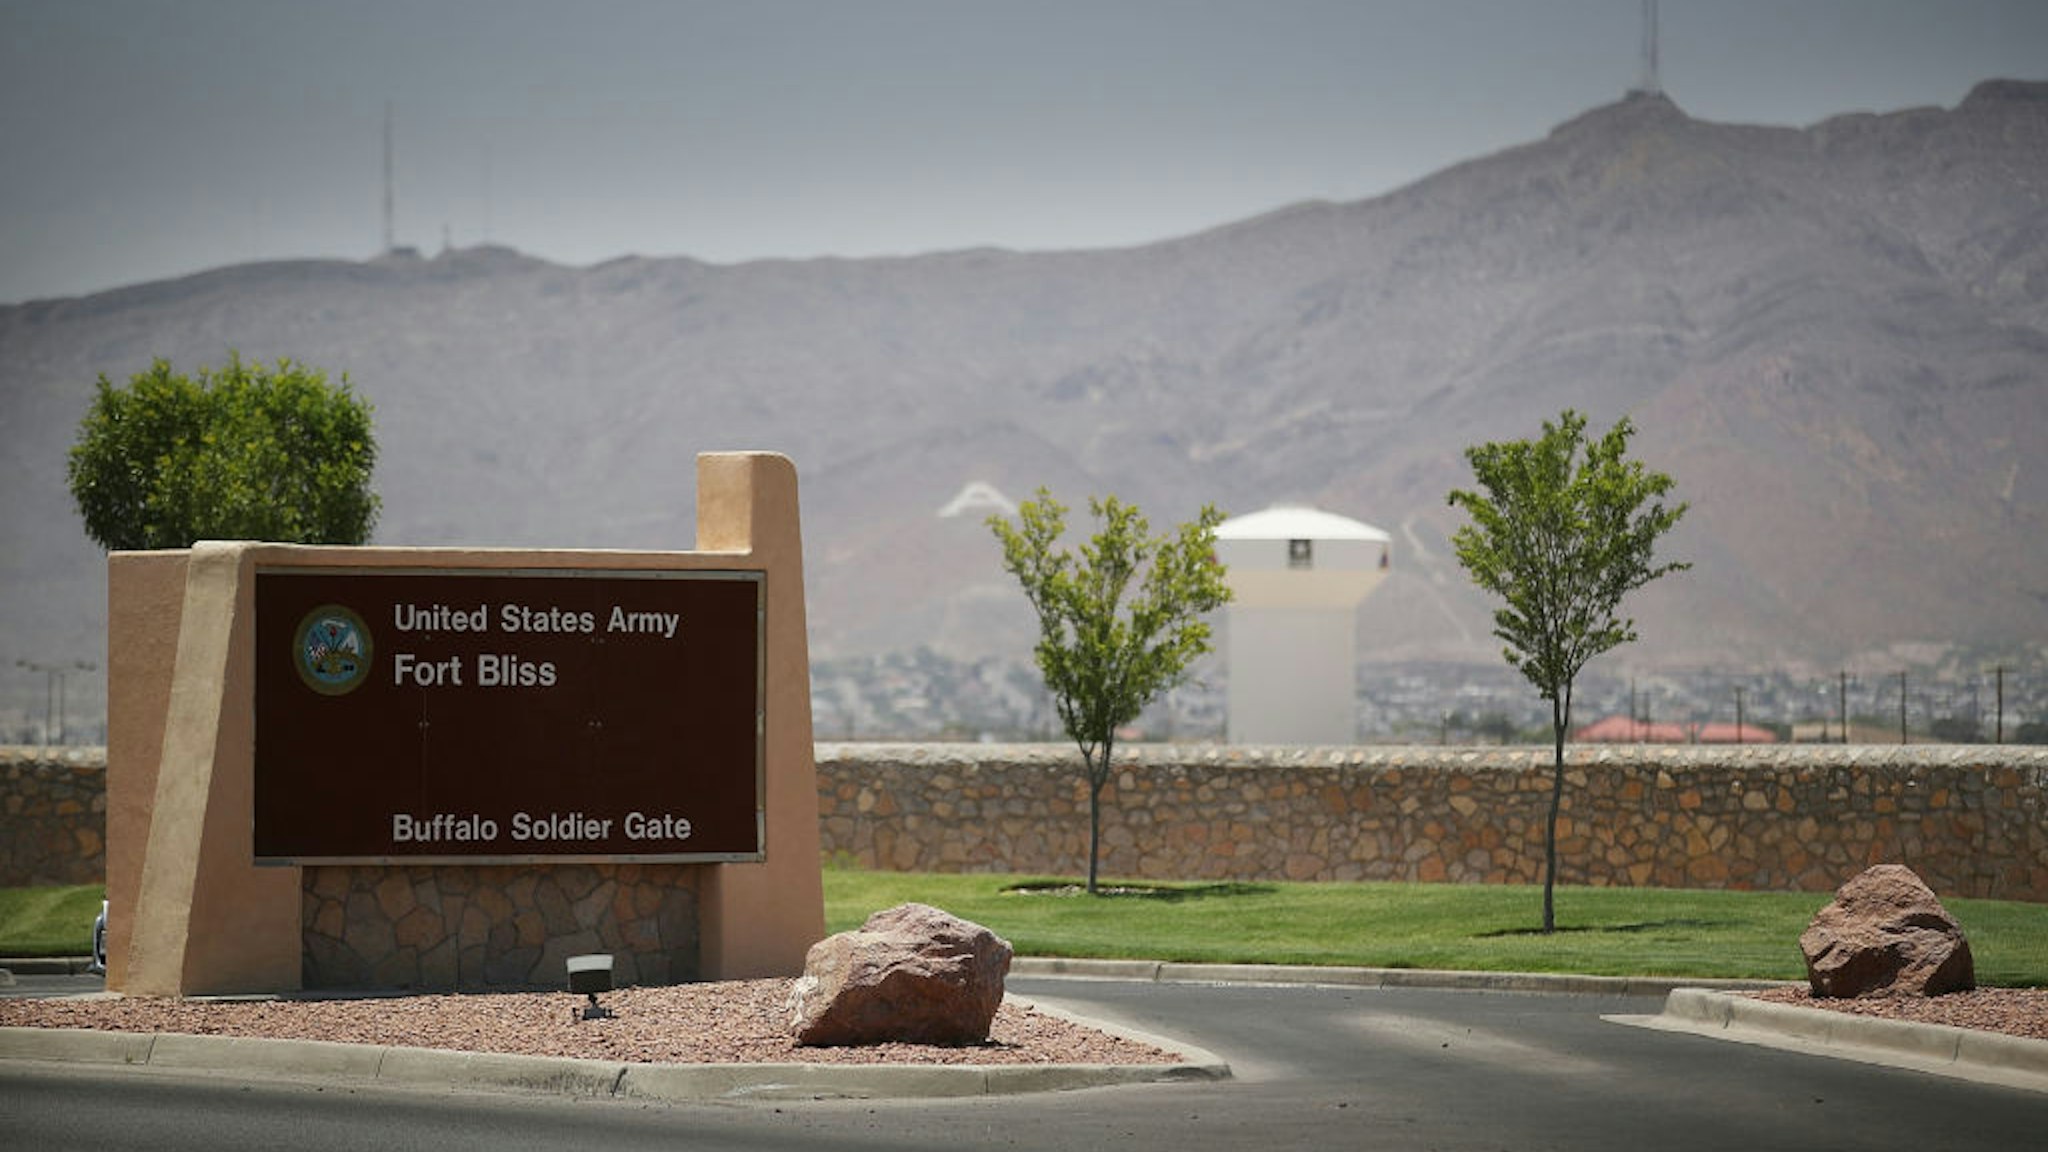 FORT BLISS, TX - JUNE 25: An entrance to Fort Bliss is shown as reports indicate the military will begin to construct temporary housing for migrants on June 25, 2018 in Fort Bliss, Texas. The reports say that the Trump administration will use Fort Bliss and Goodfellow Air Force Base to house detained migrants as they are processed through the legal system.